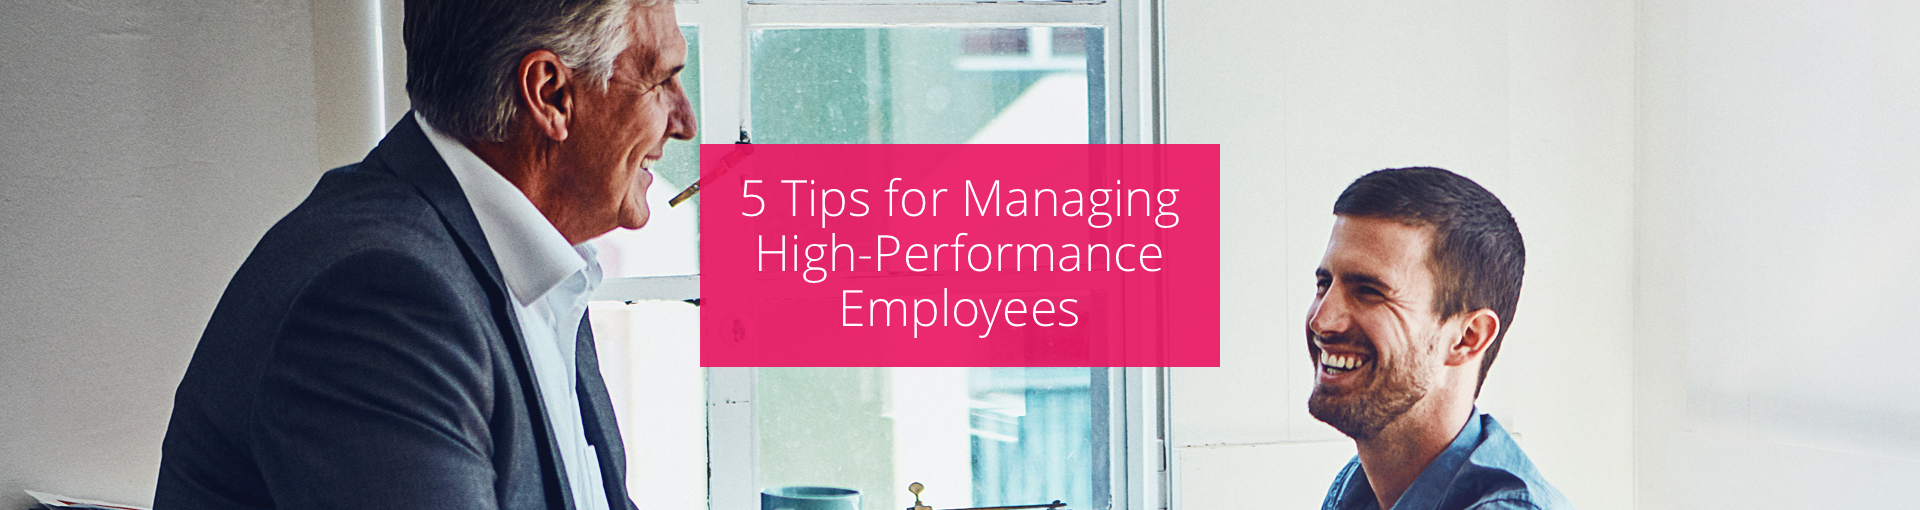 5 Tips for Managing High-Performance Employees Featured Image